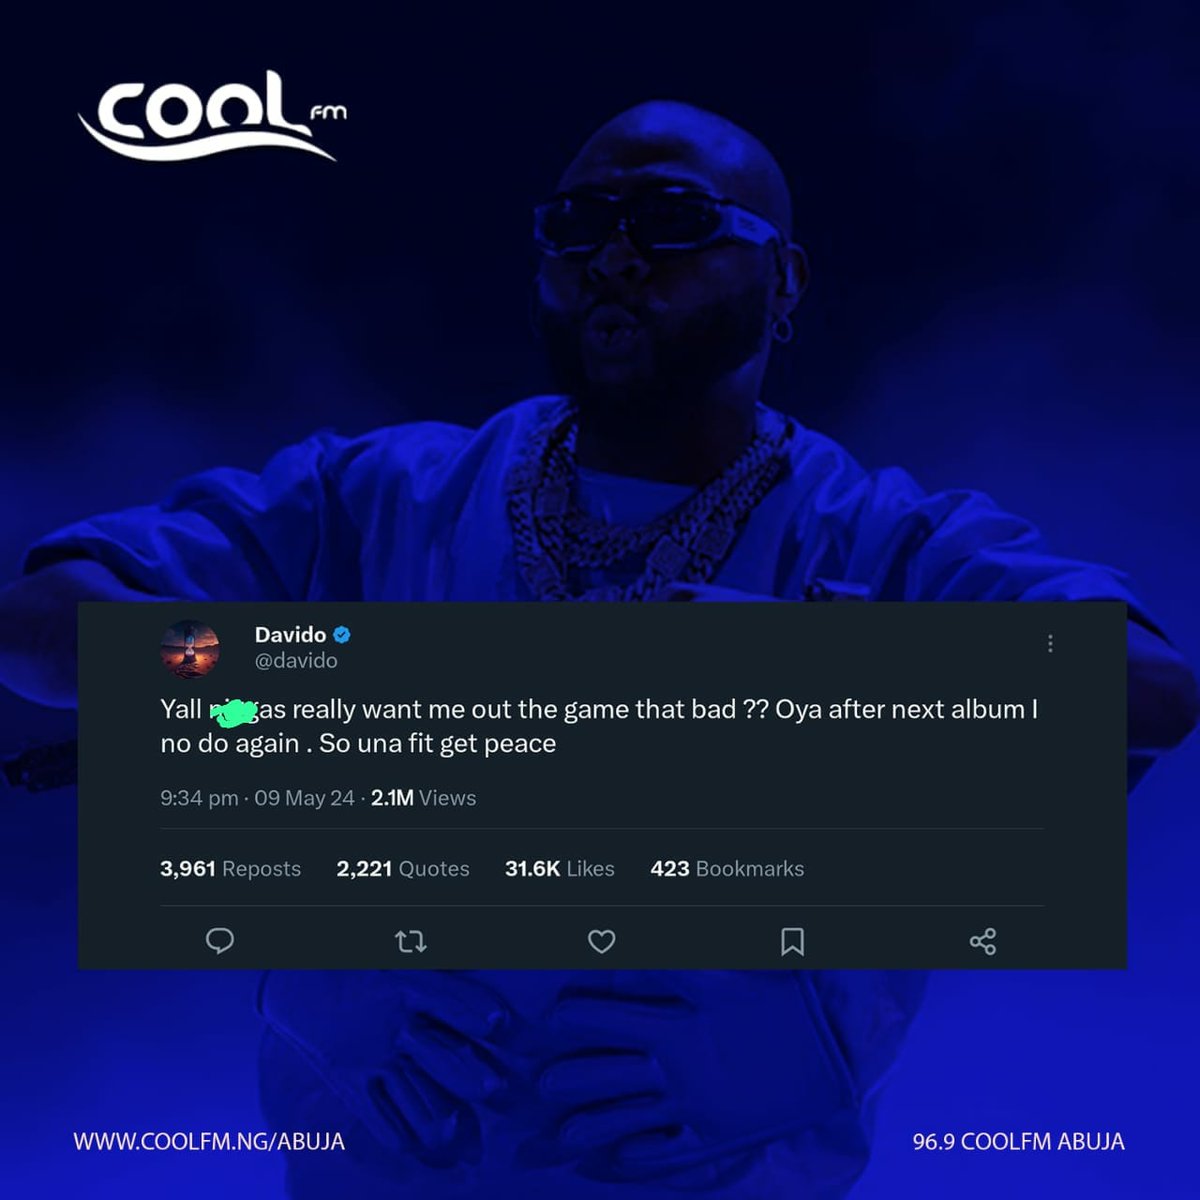 Davido teases quiting the music industry after his next album. #1hitmusicstation #coolfm969abuja